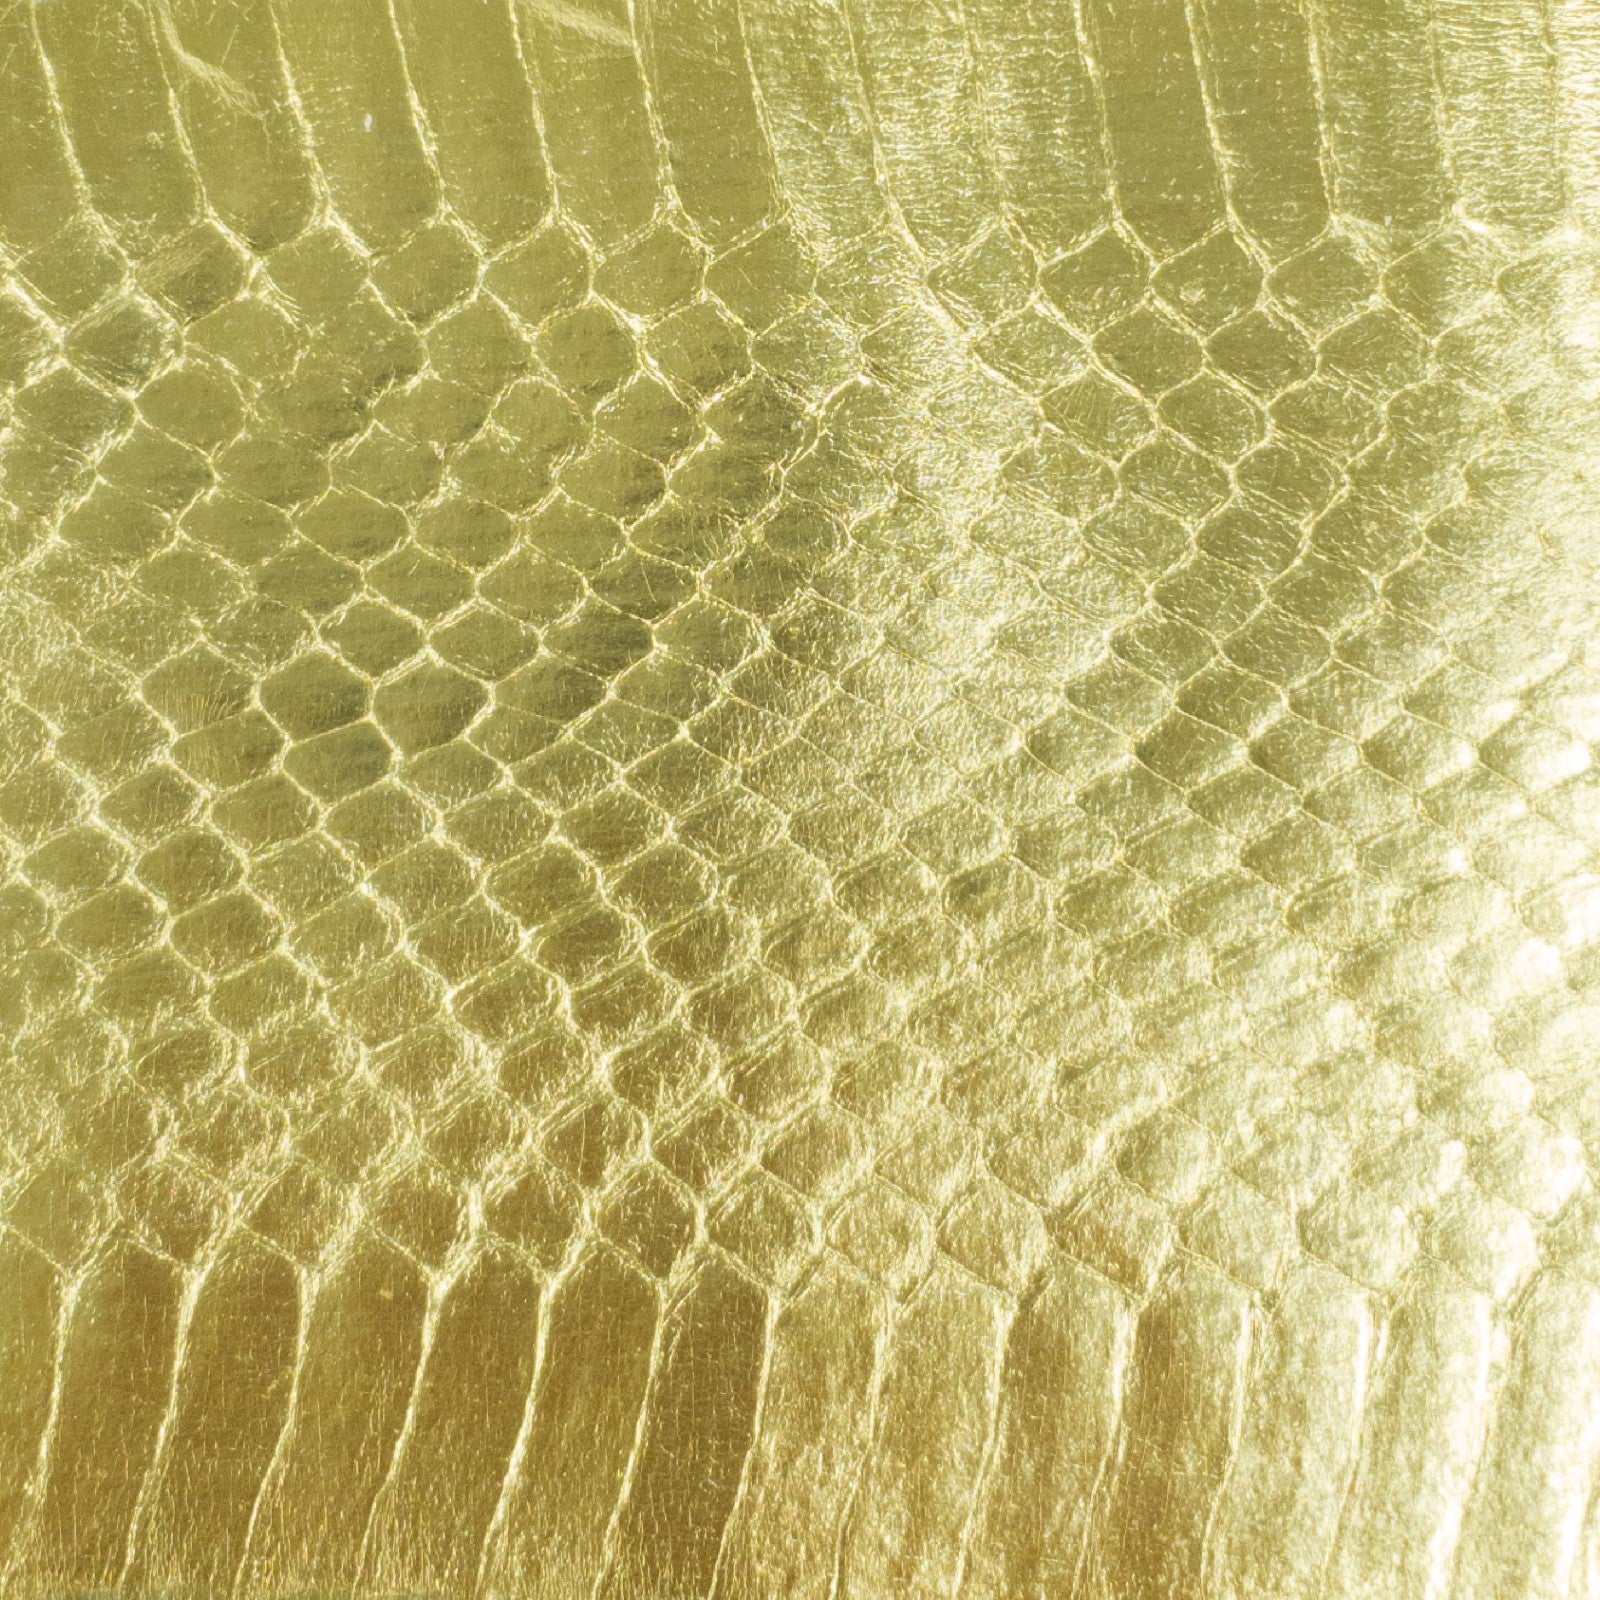 Snakeskin -  - The Leather Dictionary